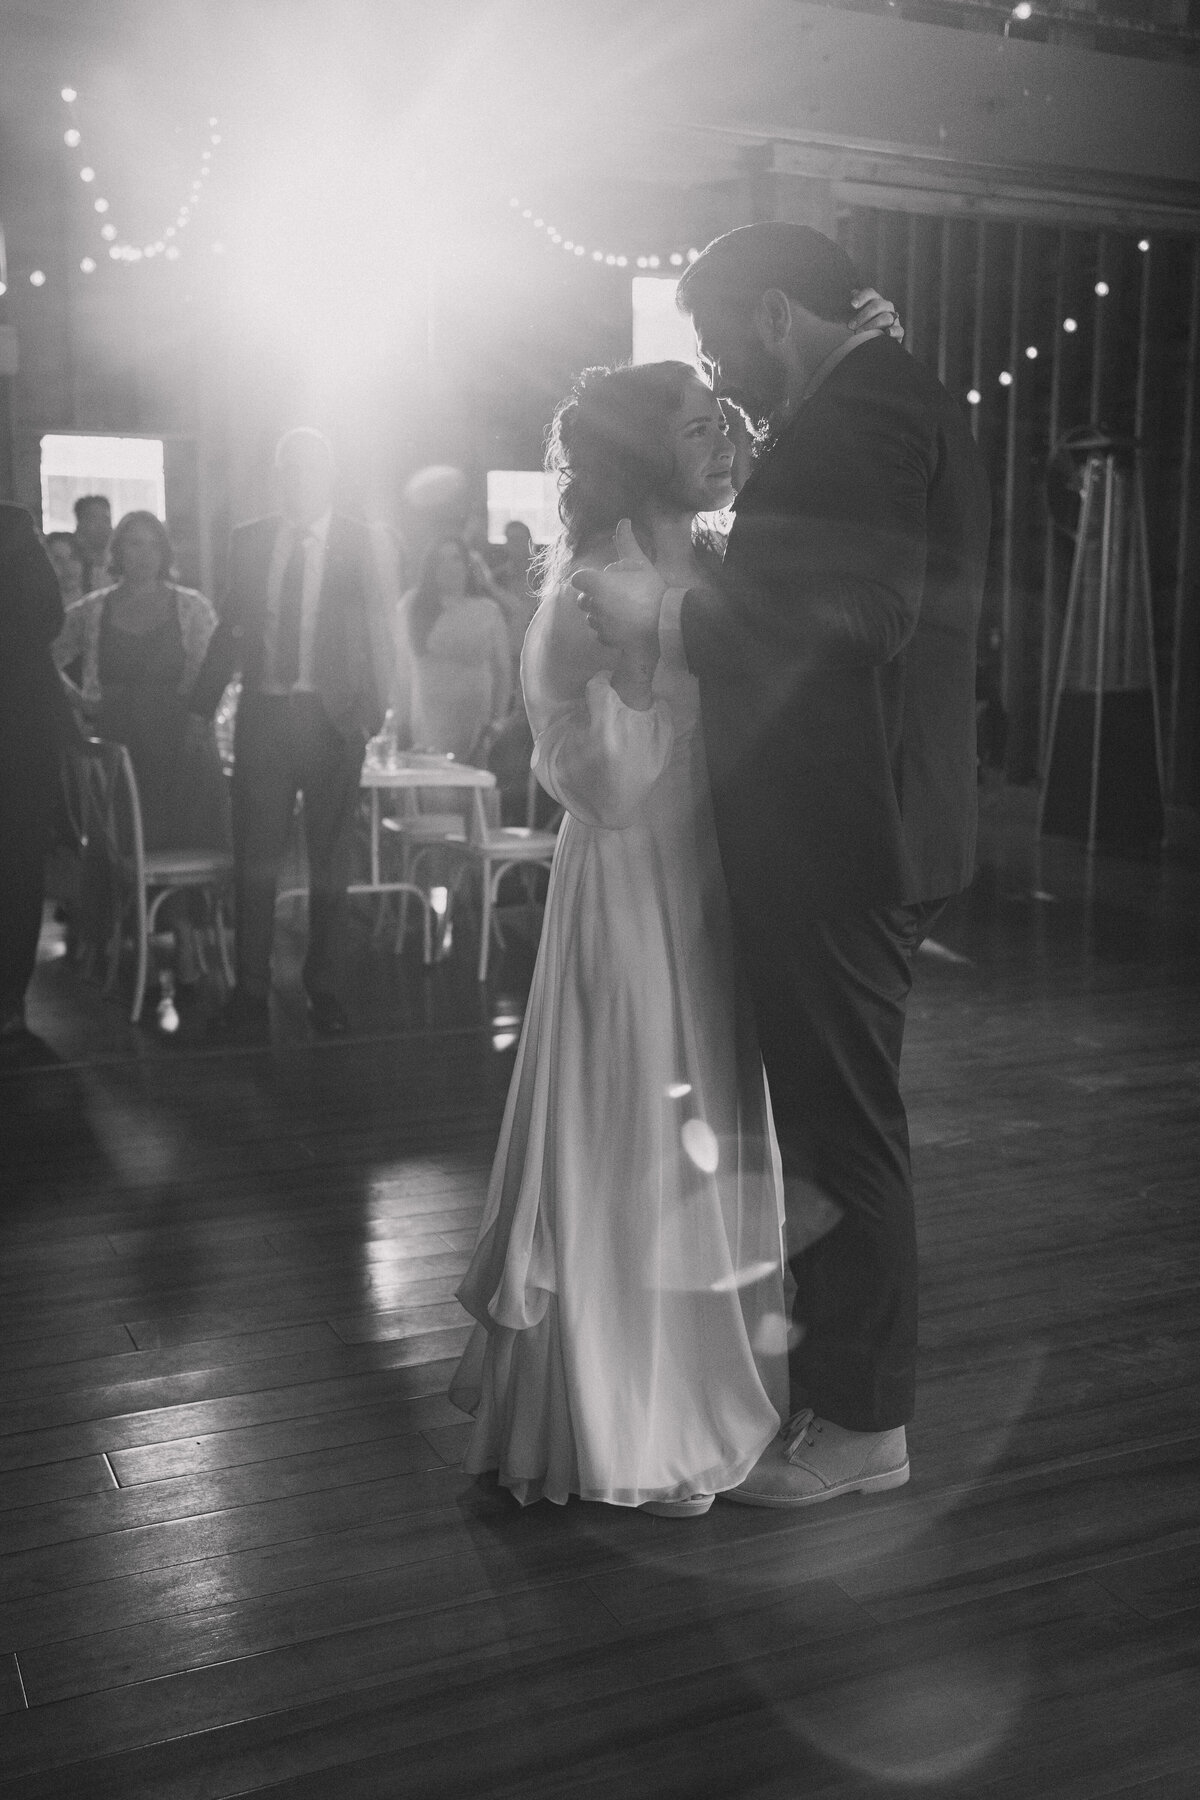 Bride and groom share a tender first dance in a beautifully lit venue, with soft string lights creating a romantic ambiance. The bride, in a flowing gown, and the groom, in a dark suit, are captured in a heartfelt, intimate moment, surrounded by guests who look on with admiration. This black and white photo emphasizes the timeless and emotional essence of their special day.